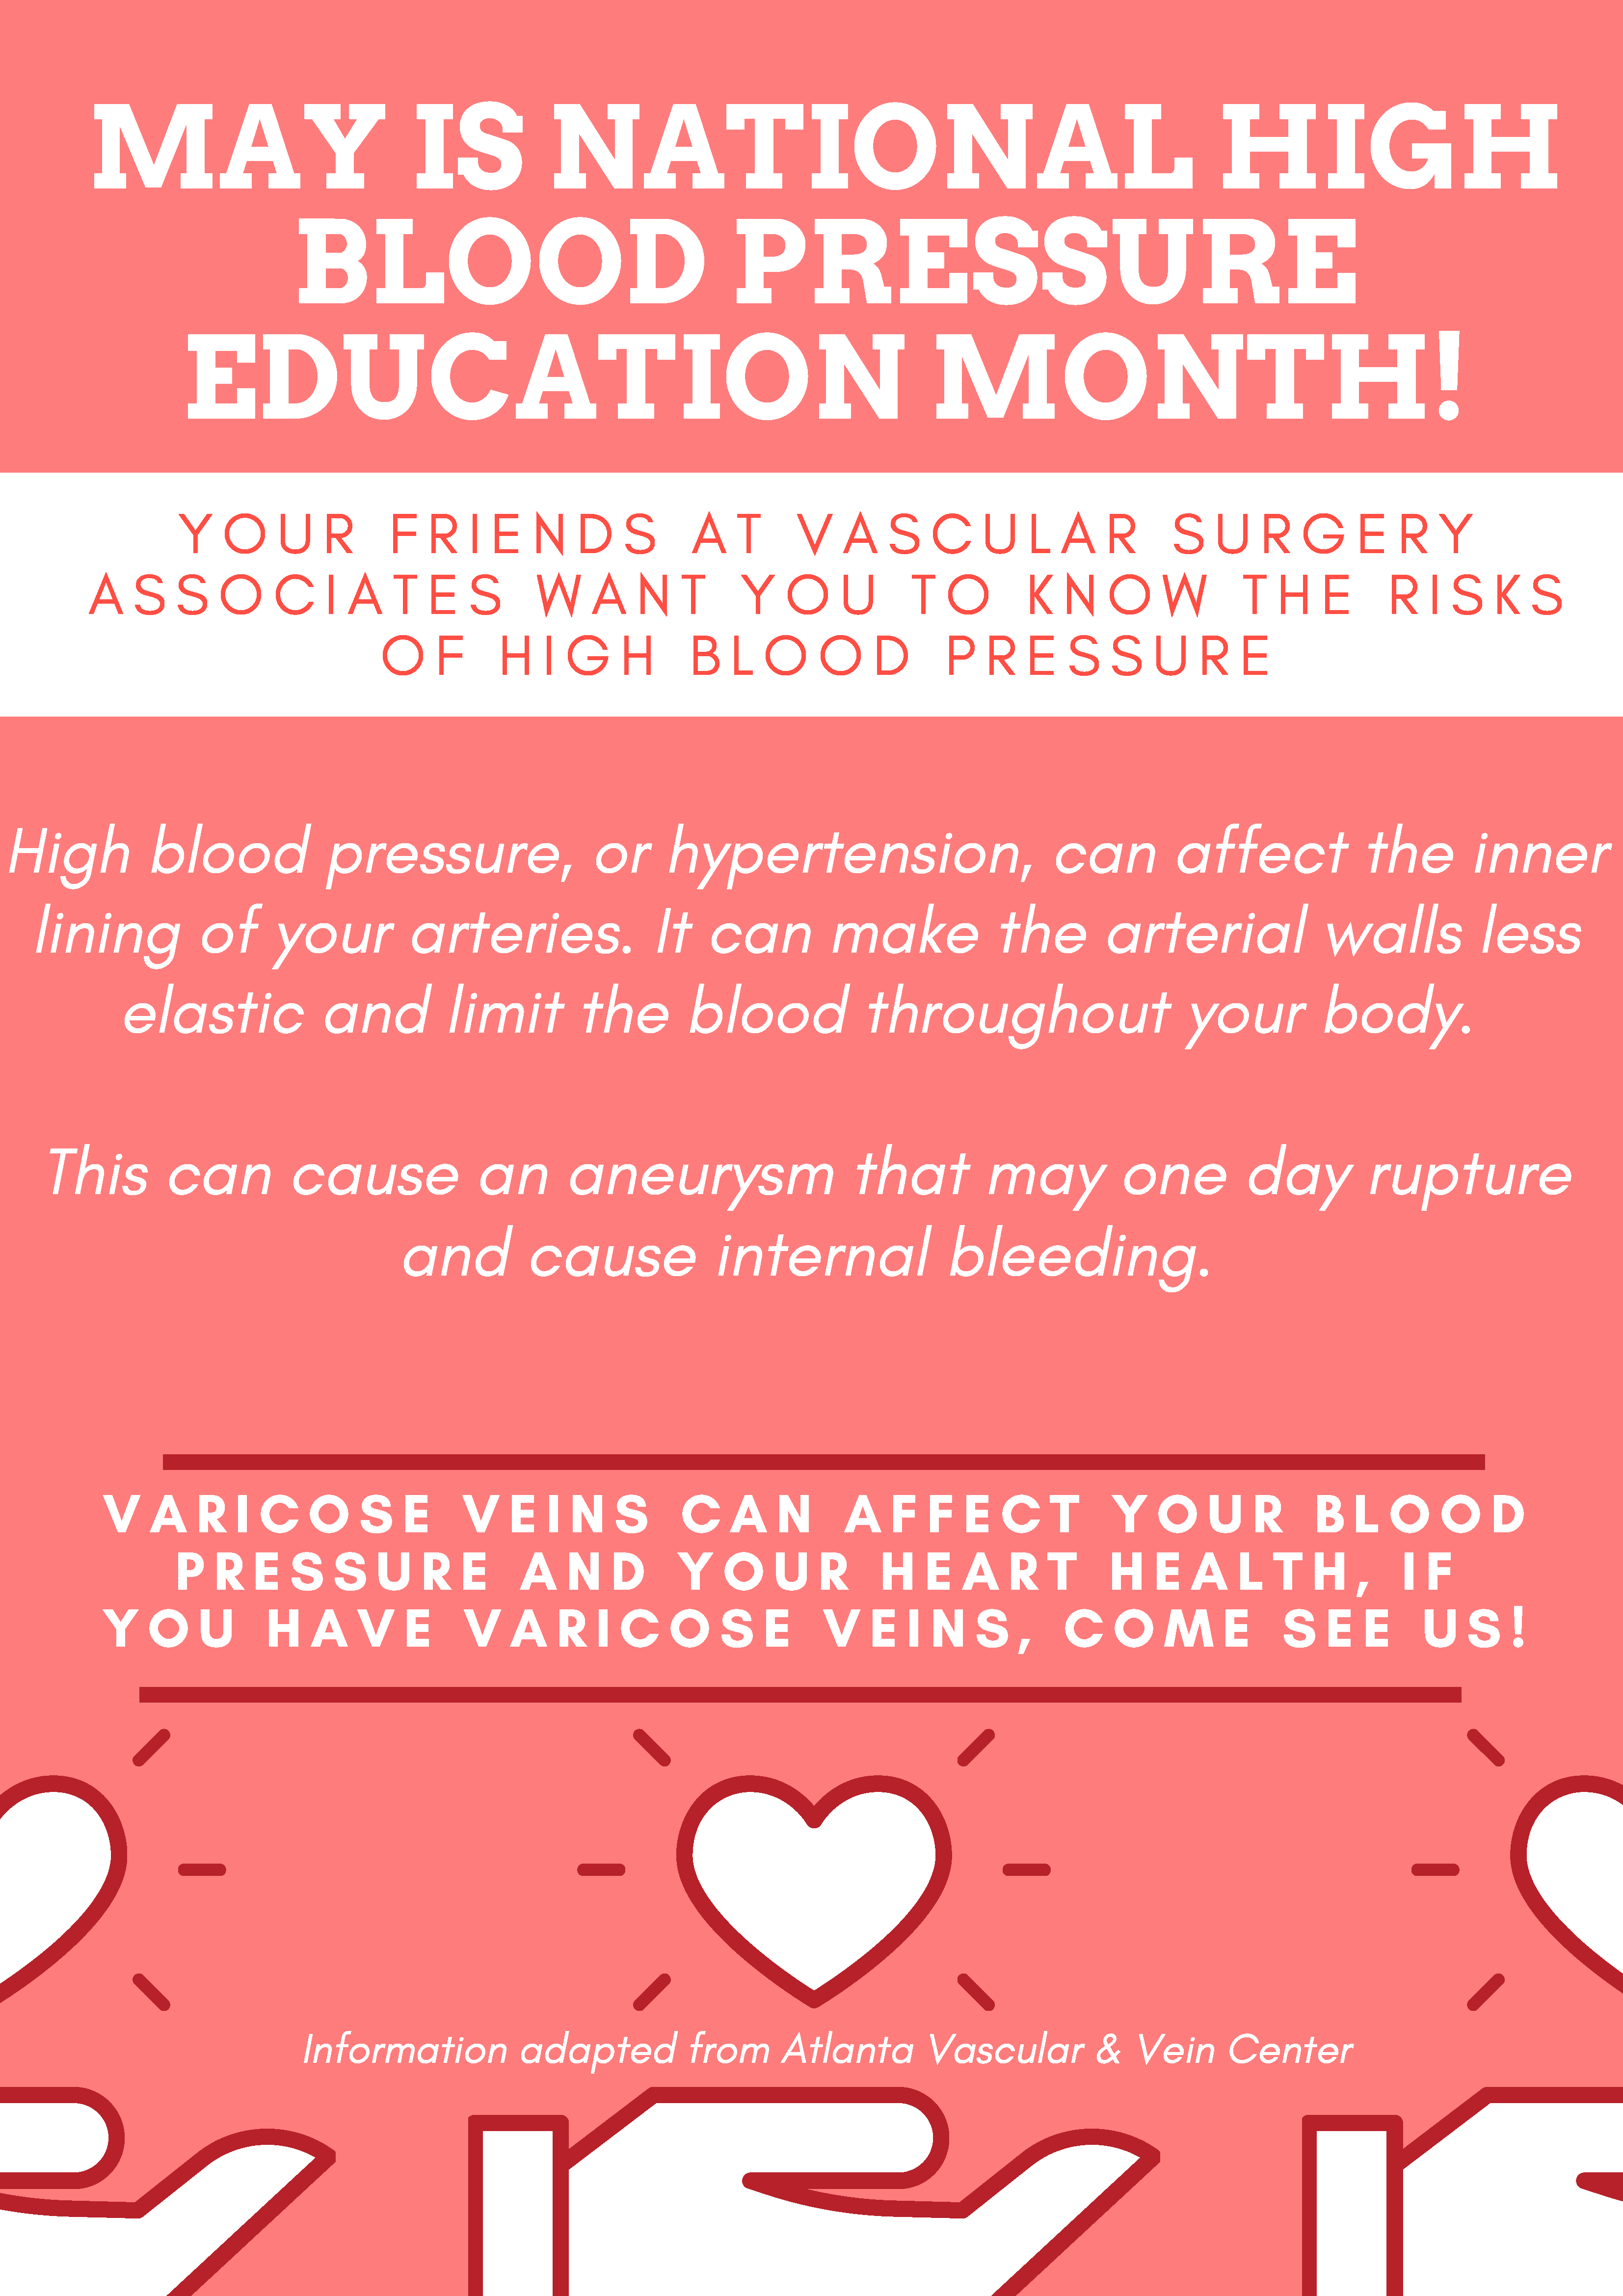 MAY IS NATIONAL HIGHBLOOD PRESSURE EDUCATION MONTH! Y O U R F R I E N D S A T V A S C U L A R S U R G E R Y A S S O C I A T E S W A N T Y O U T O K N O W T H E R I S K S O F H I G H B L O O D P R E S S U R E High blood pressure, or hypertension, can affect the inner lining of your arteries. It can make the arterial walls less elastic and limit the blood throughout your body. This can cause an aneurysm that may one day rupture and cause internal bleeding.